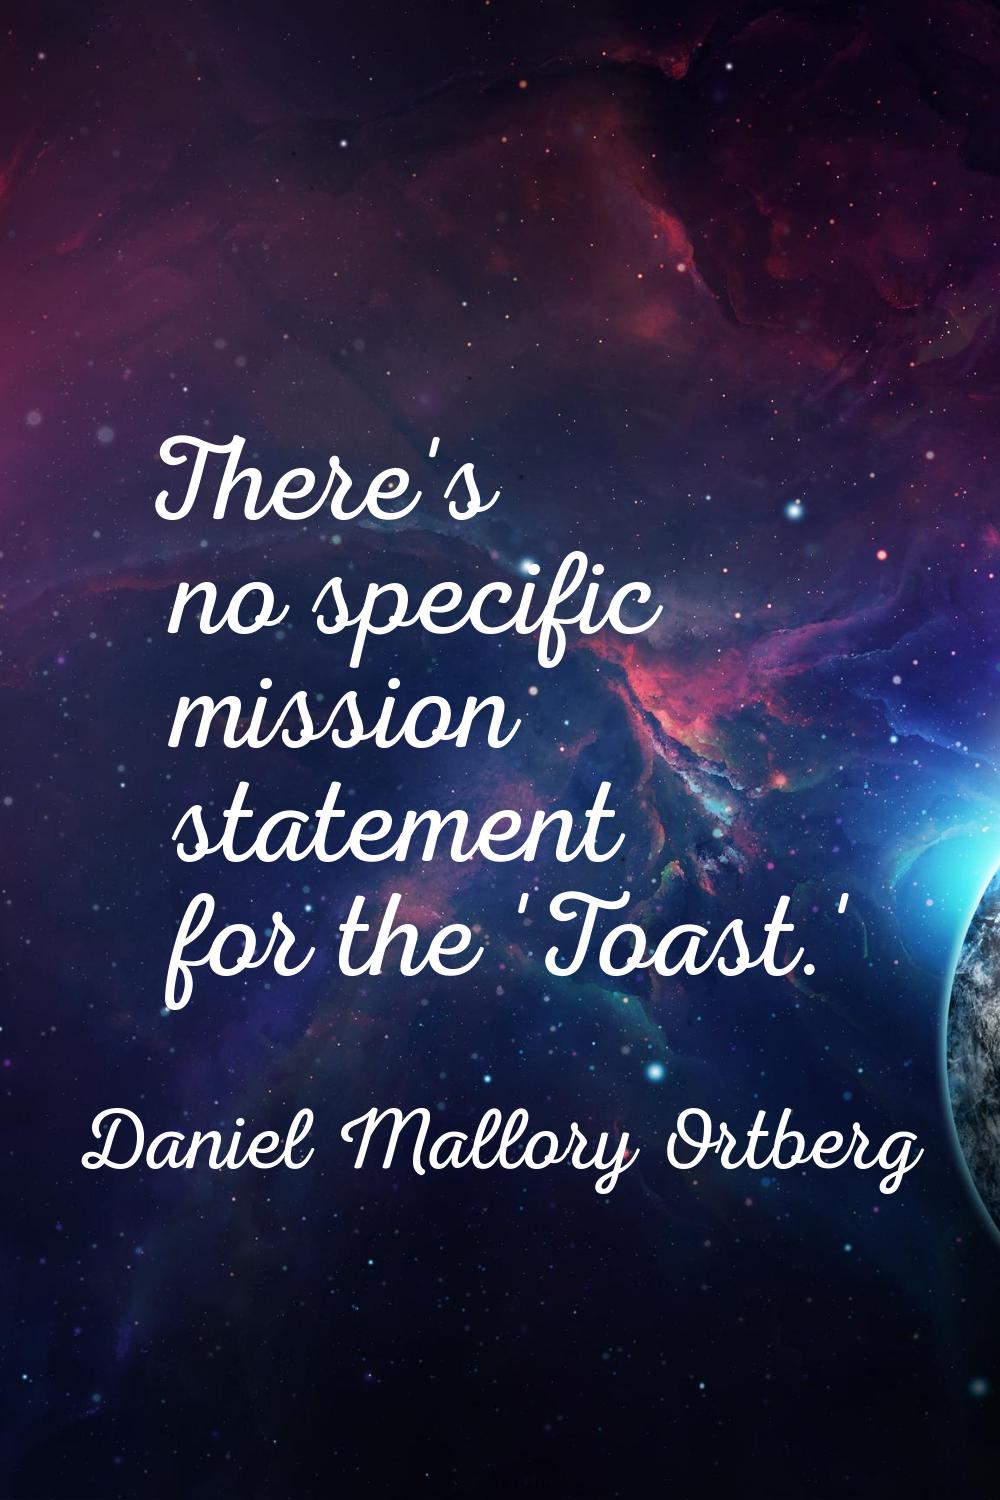 There's no specific mission statement for the 'Toast.'